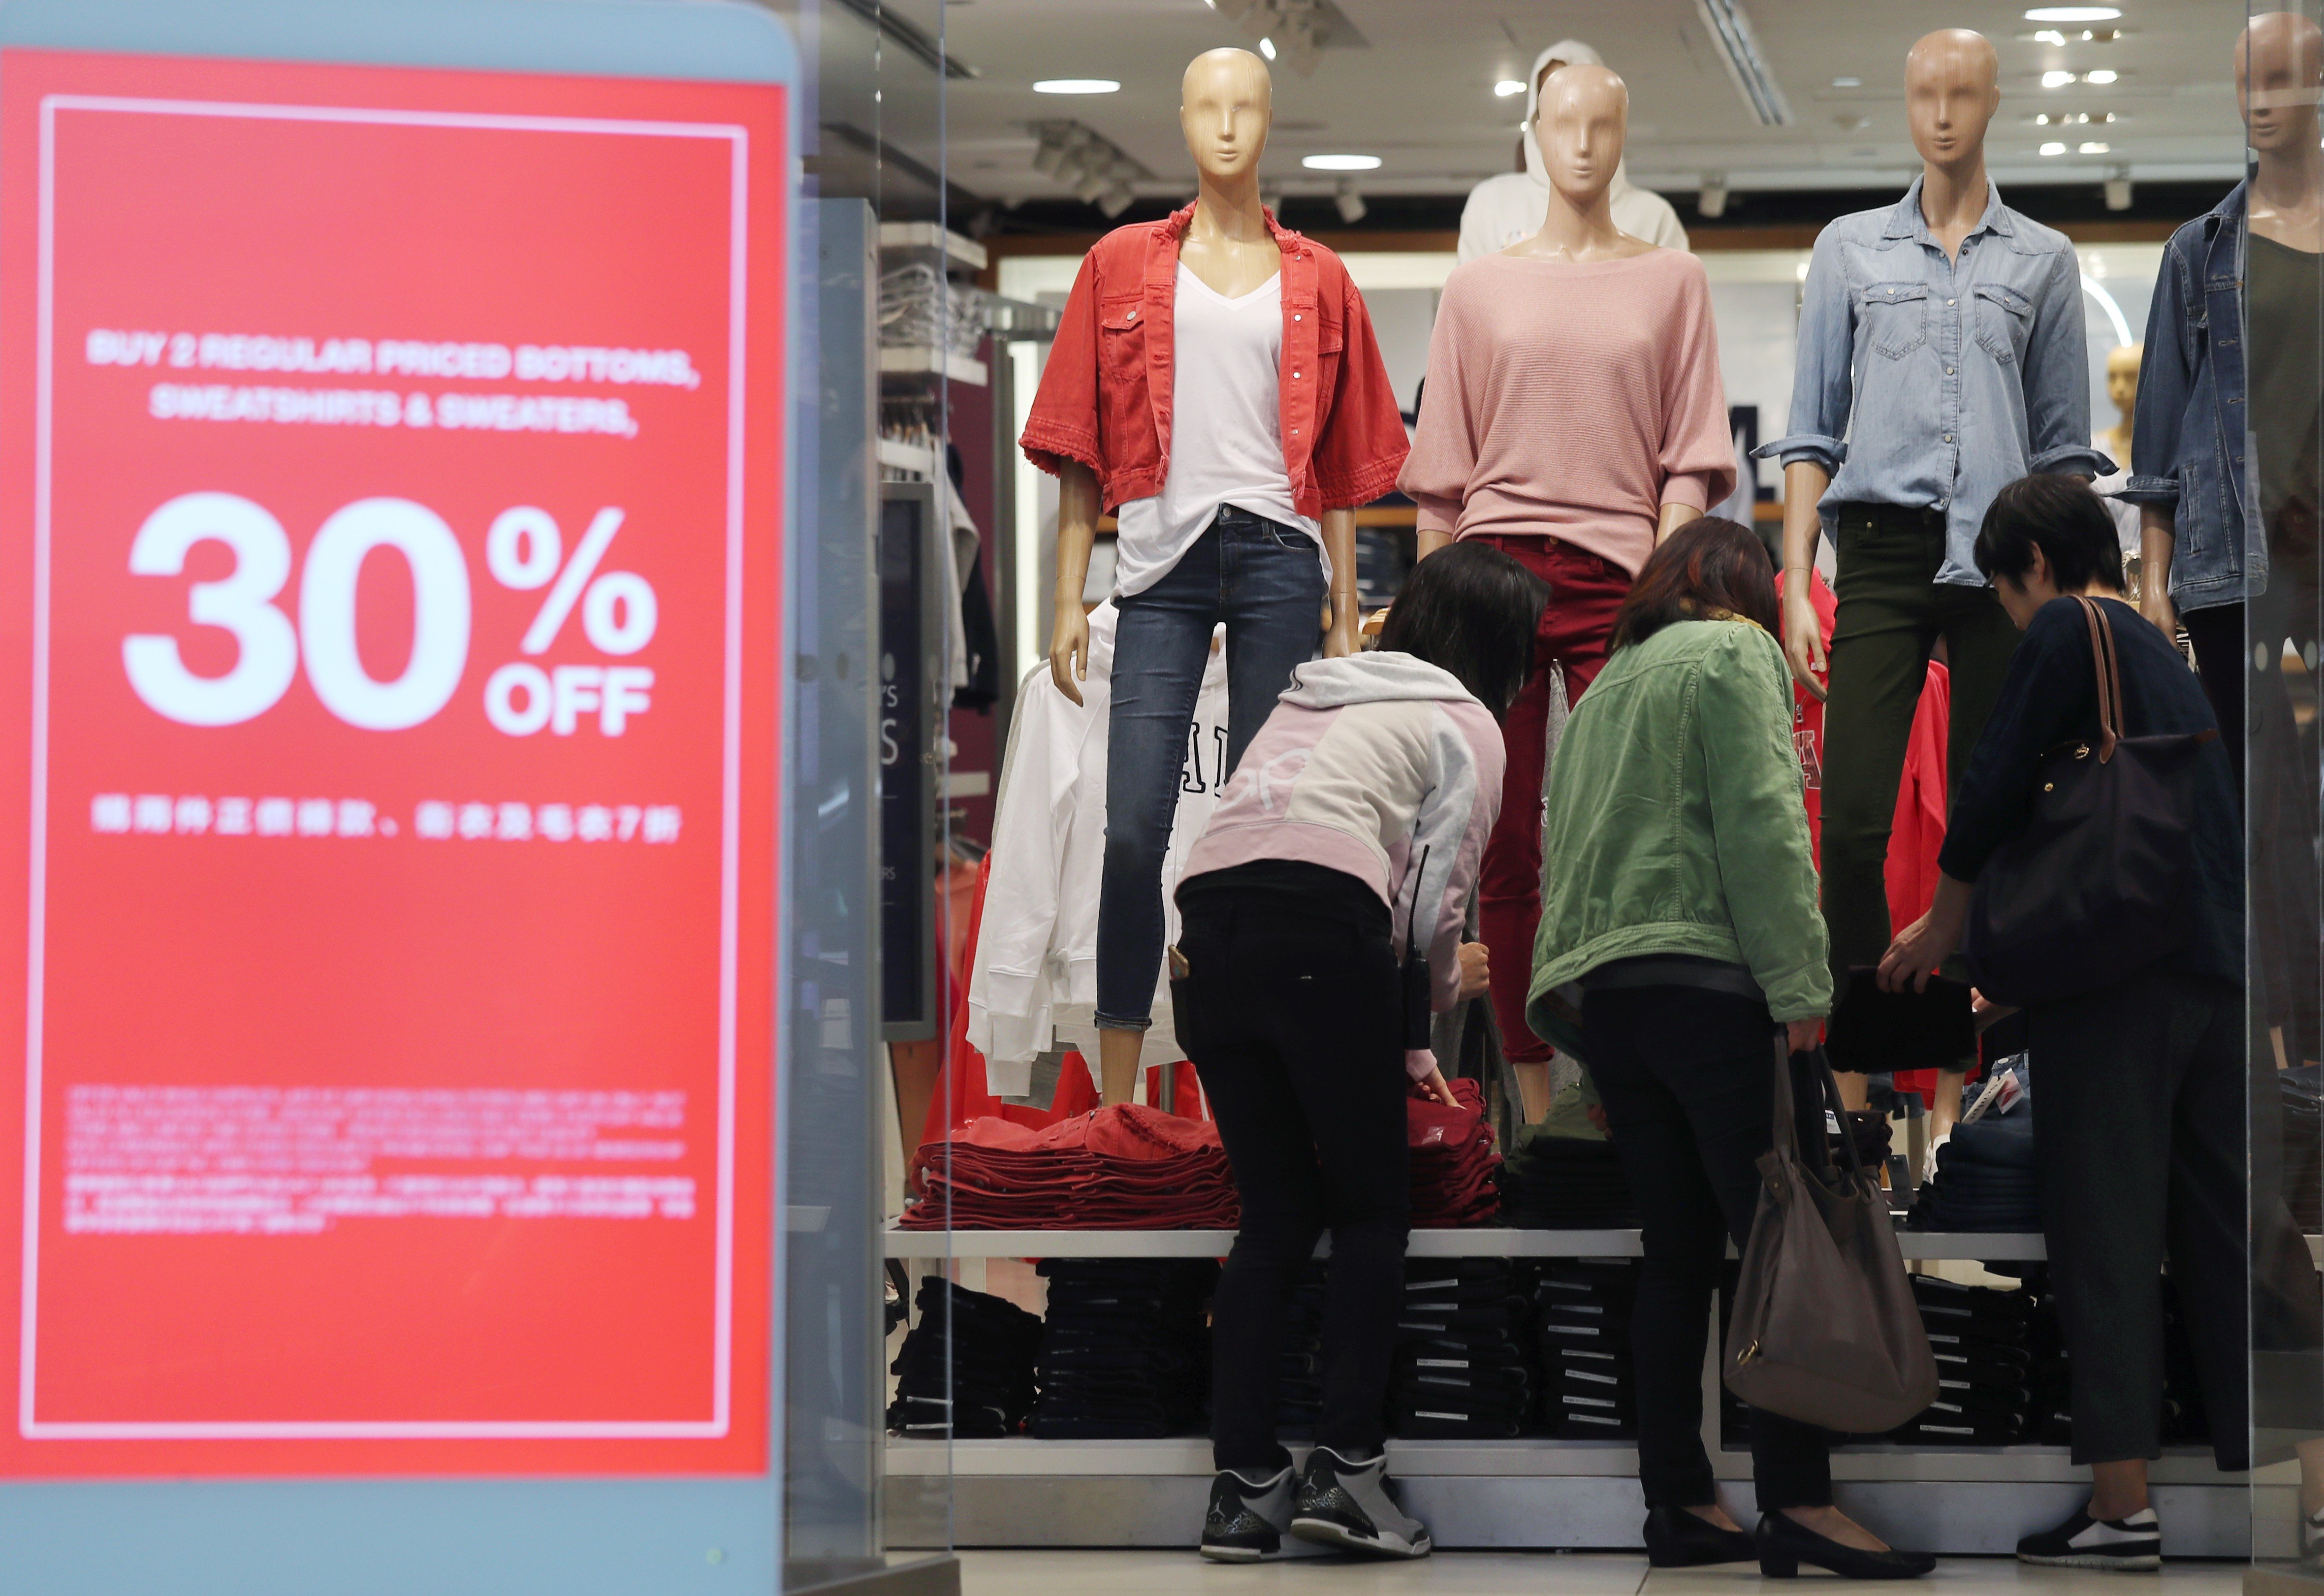 Upbeat sentiment helped consumer spending. Photo: K.Y. Cheng